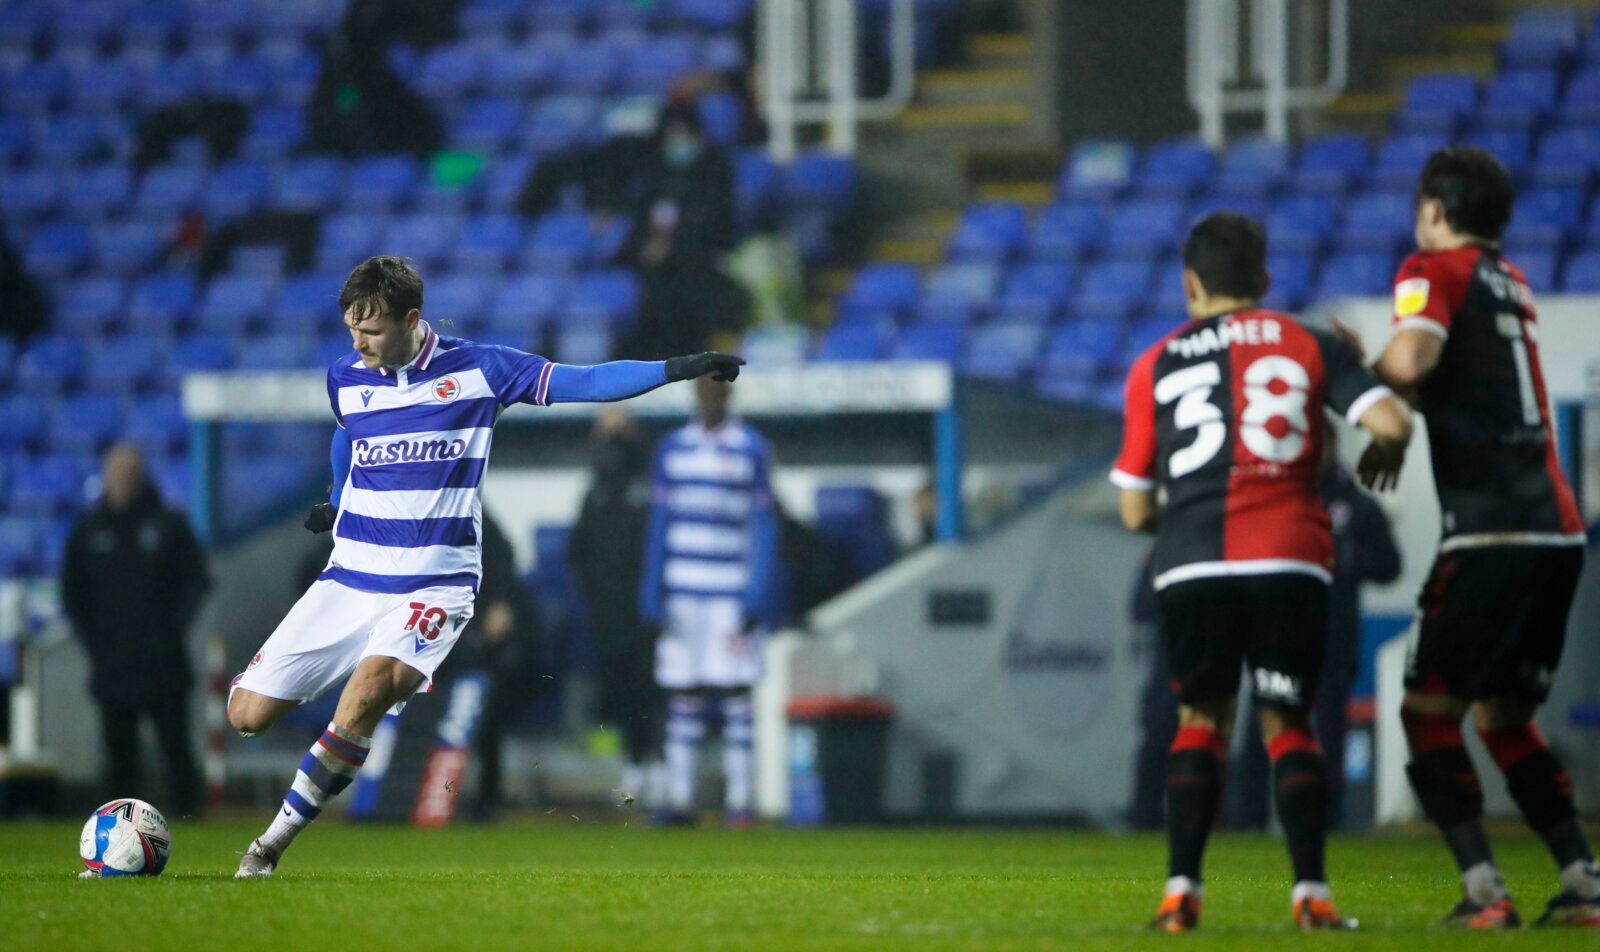 Soccer Football - Championship - Reading v Coventry City - Madejski Stadium, Reading, Britain - January 19, 2021 Reading's John Swift scores their third goal Action Images/Andrew Couldridge EDITORIAL USE ONLY. No use with unauthorized audio, video, data, fixture lists, club/league logos or 'live' services. Online in-match use limited to 75 images, no video emulation. No use in betting, games or single club /league/player publications.  Please contact your account representative for further detai